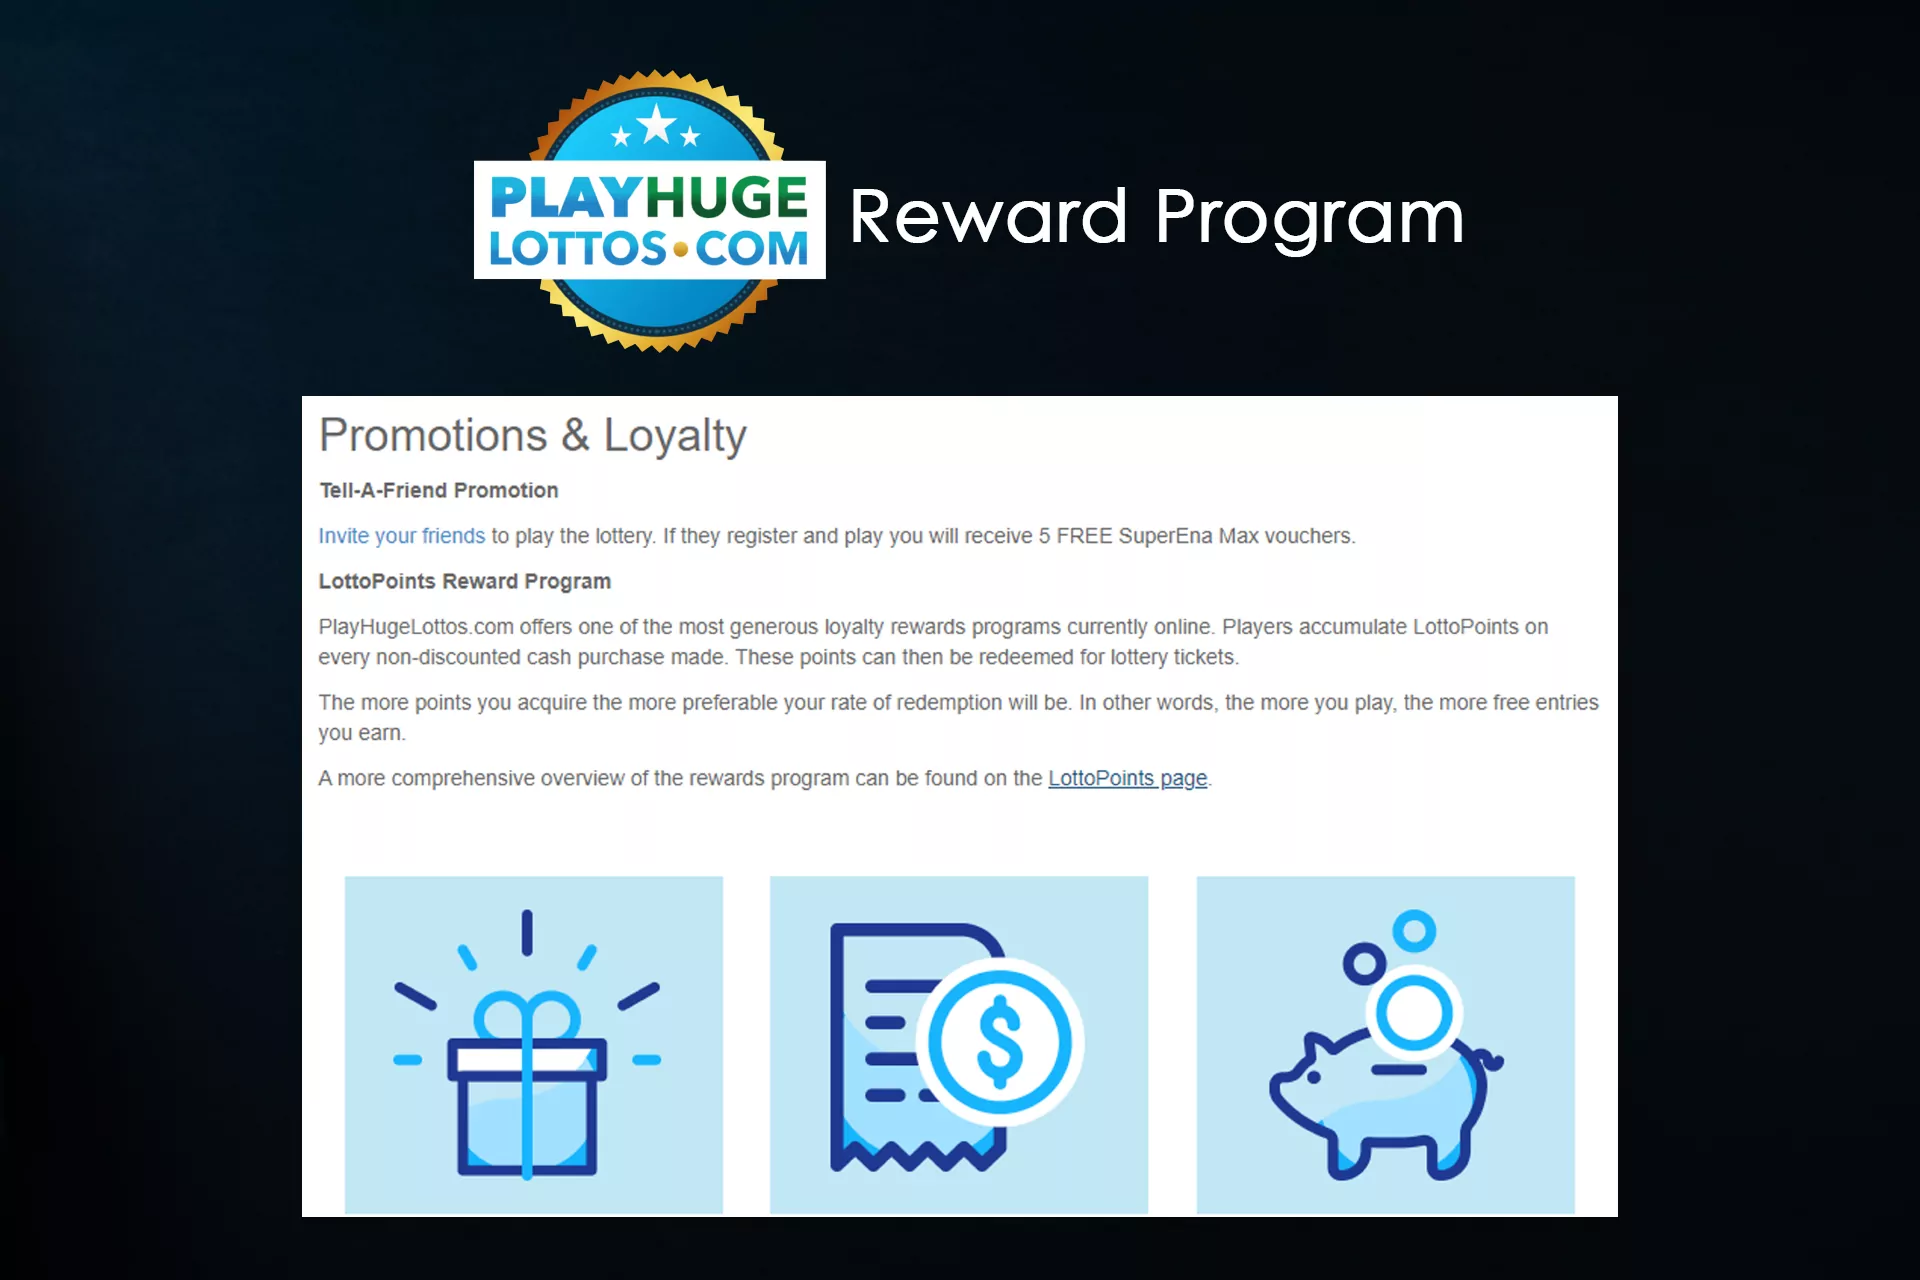 Read the terms and conditions of the Reward Program correctly to be able to receive bonuses.